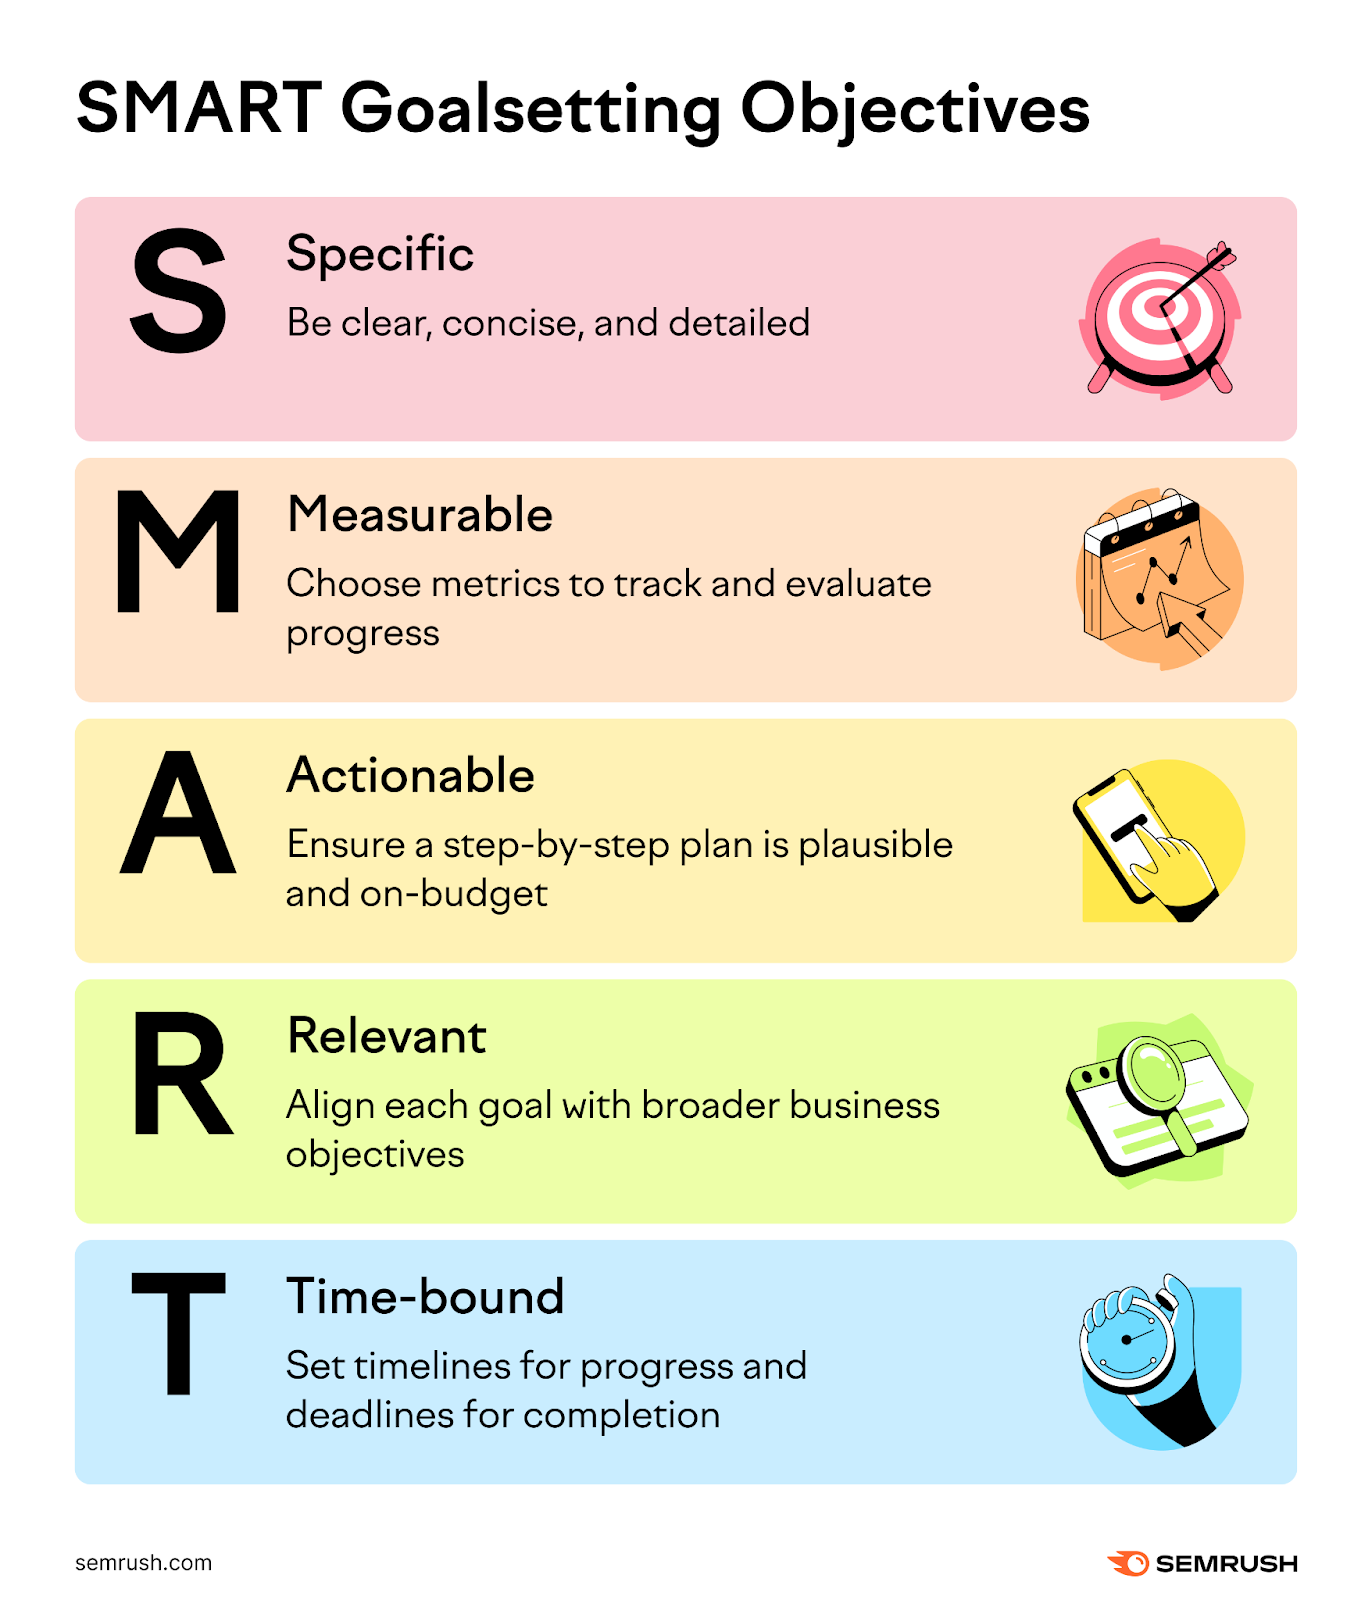 An infographic by Semrush listing what SMART marketing goals stand for